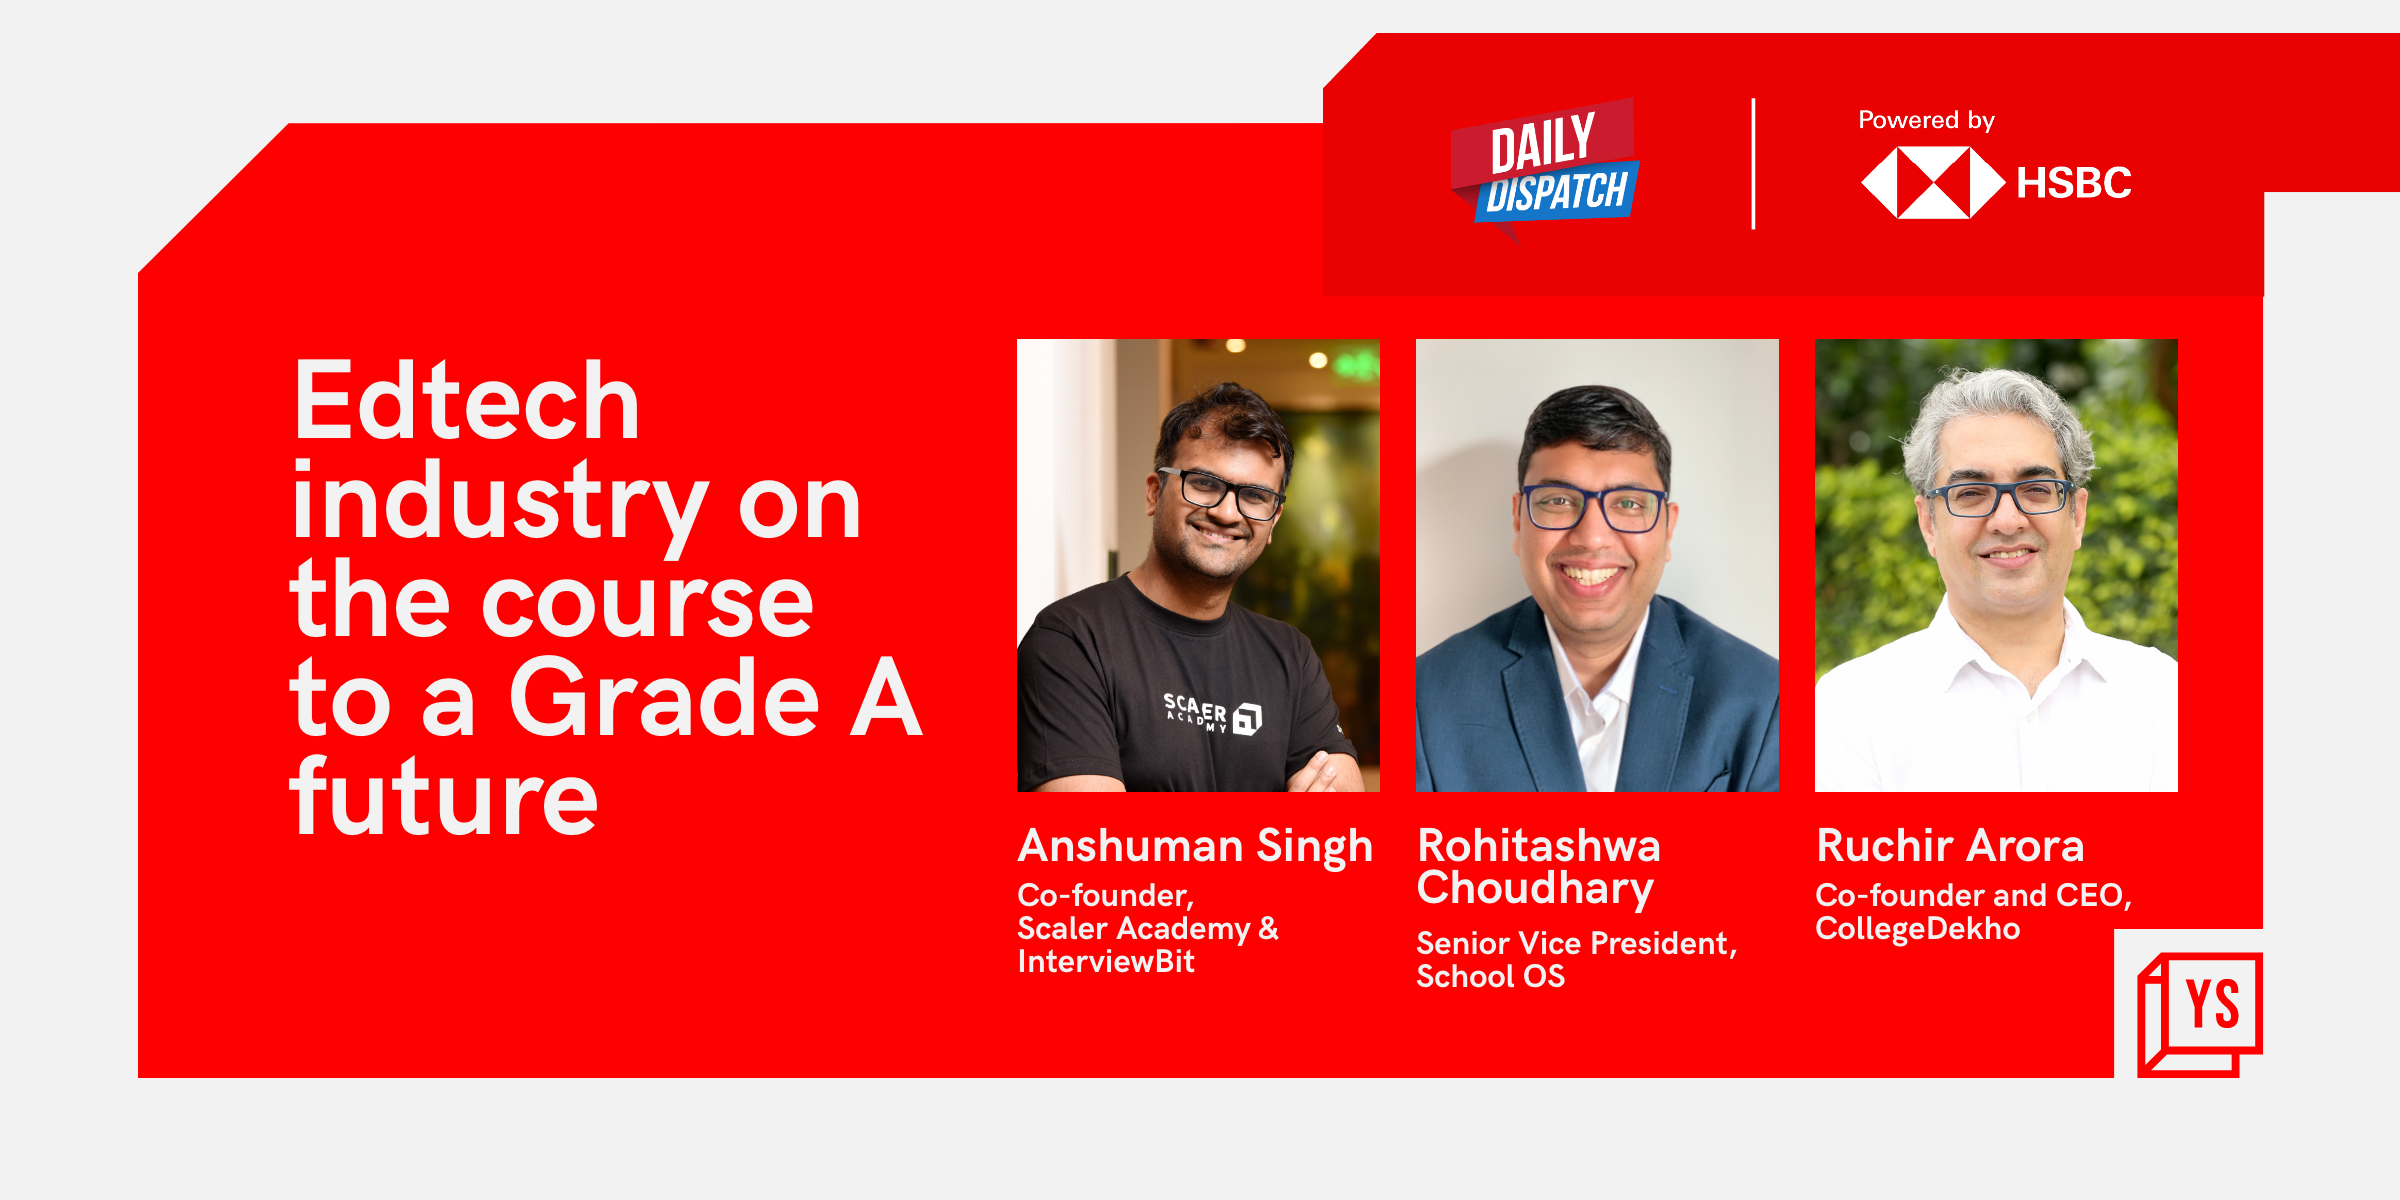 Edtech will continue to grow, say founders of Scaler Academy, School OS, and CollegeDekho